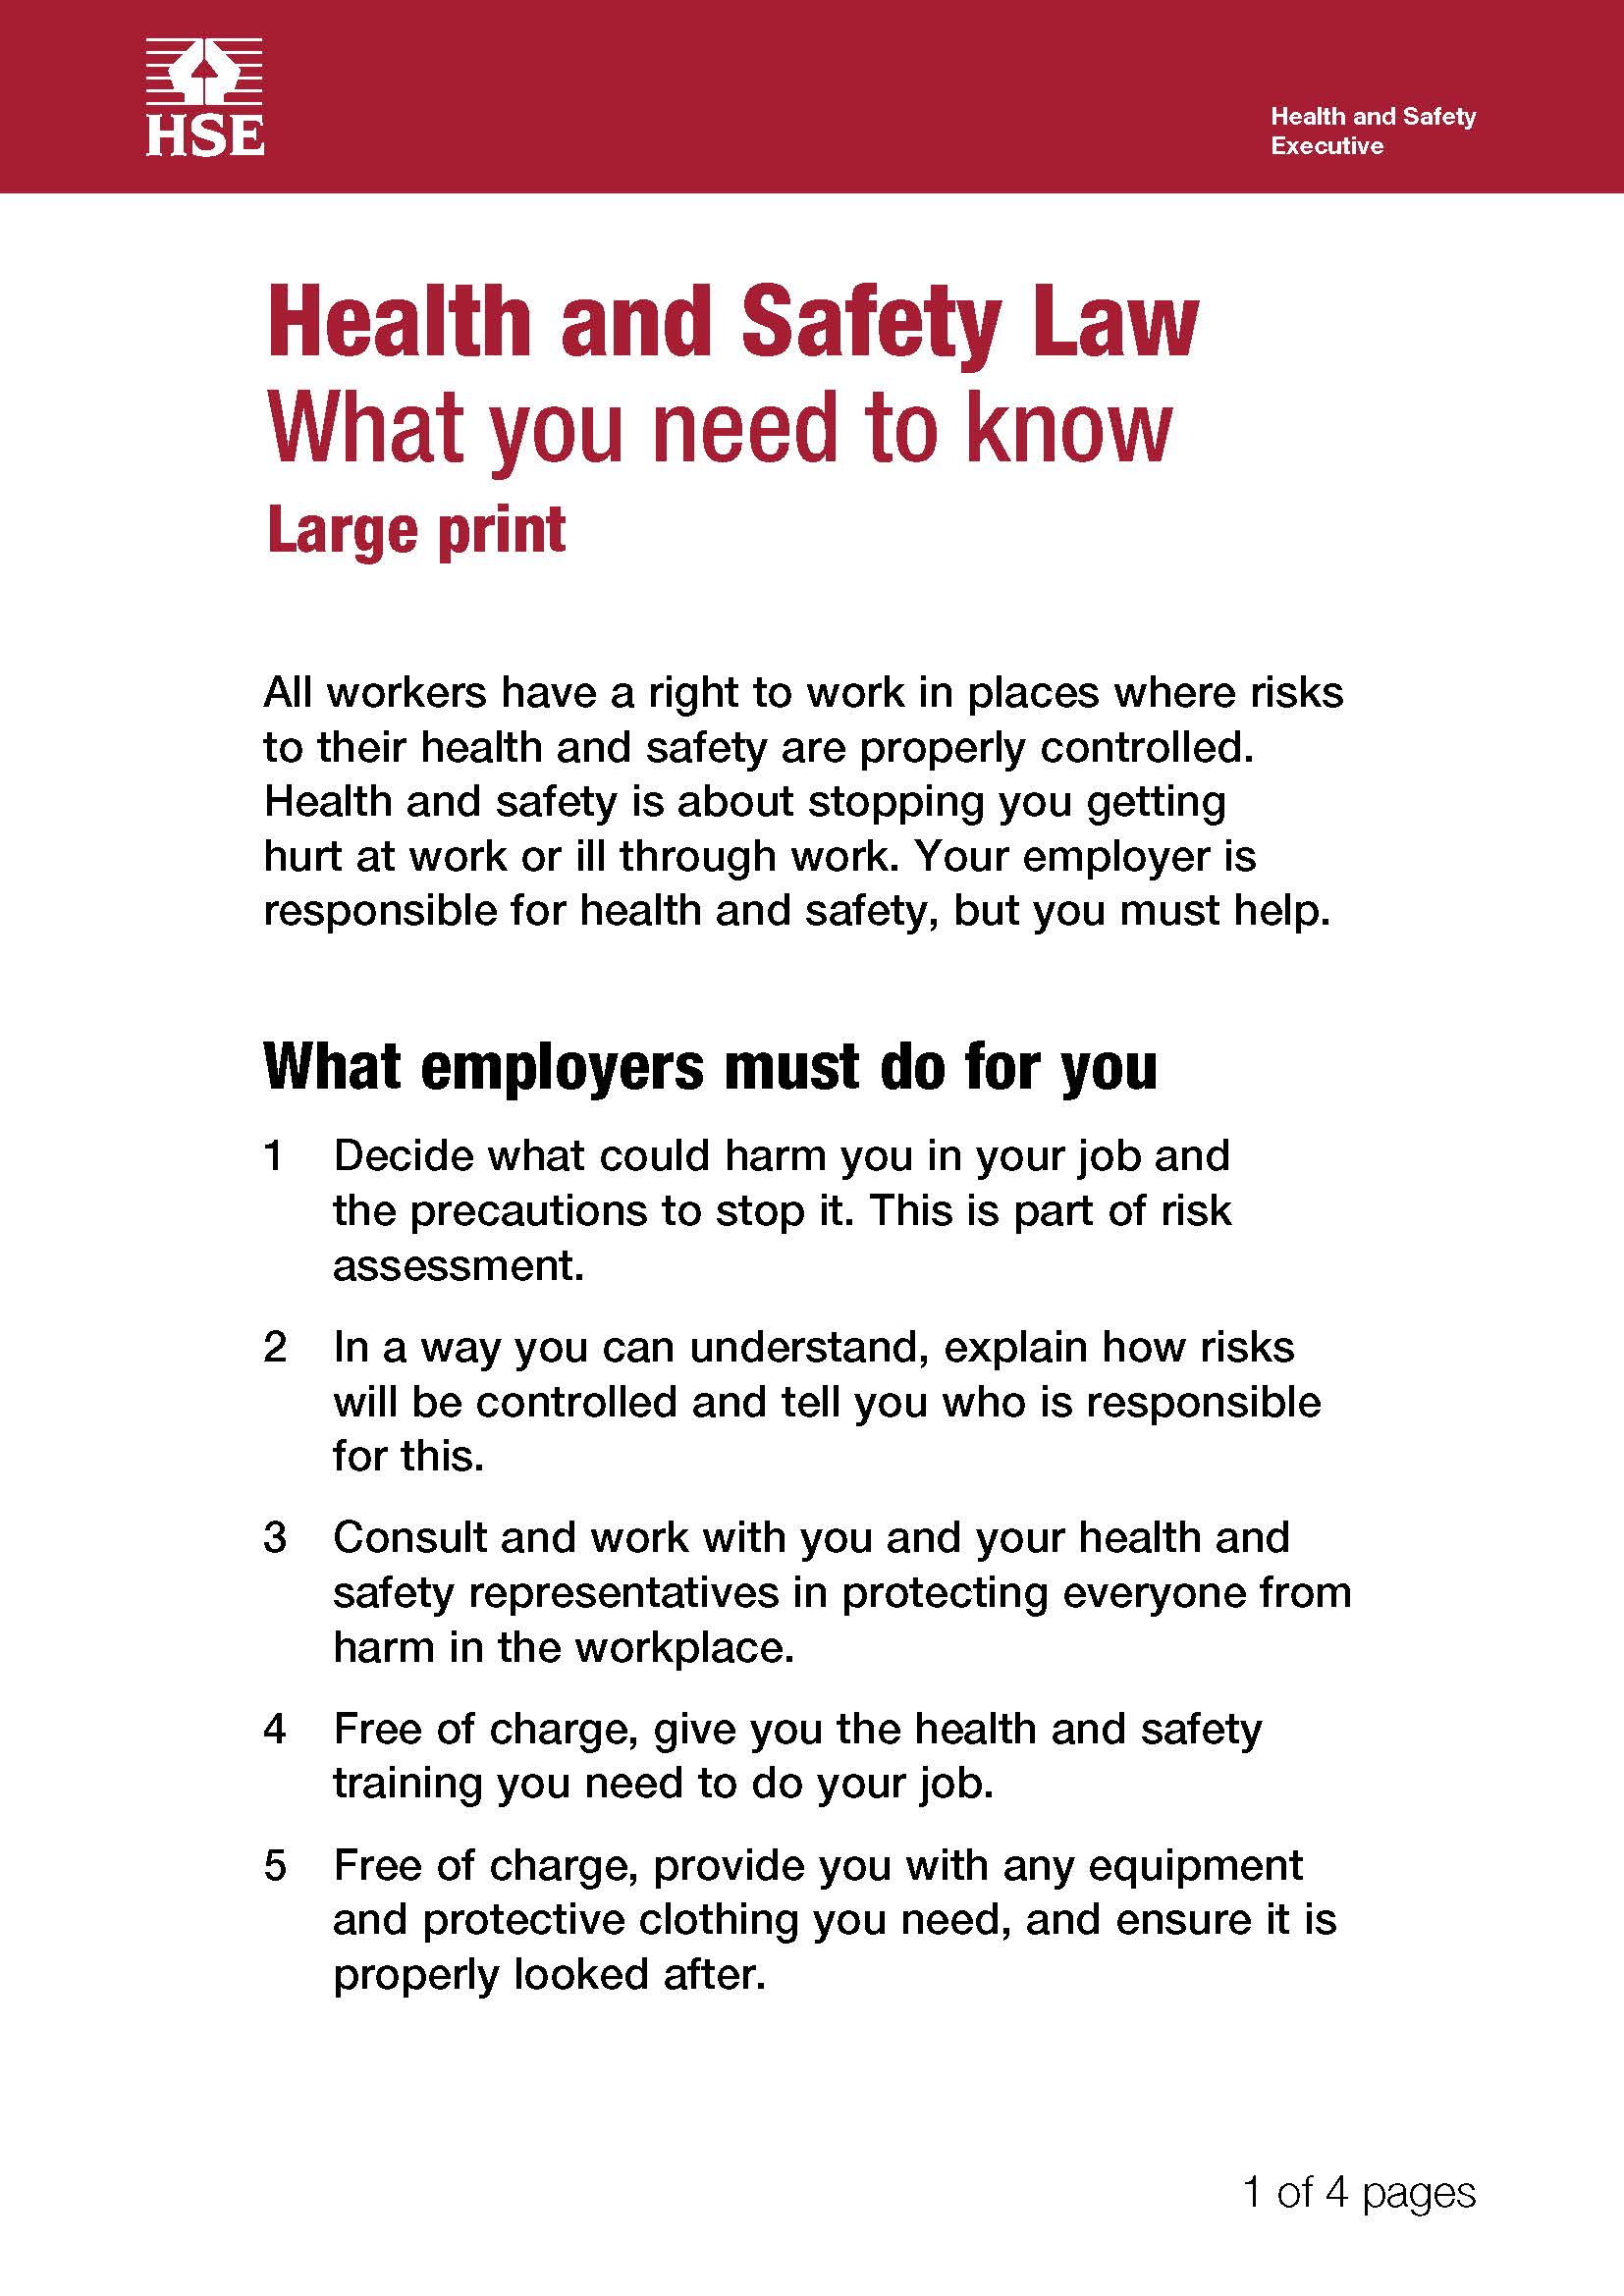 image shows Health and Safety legislation poster